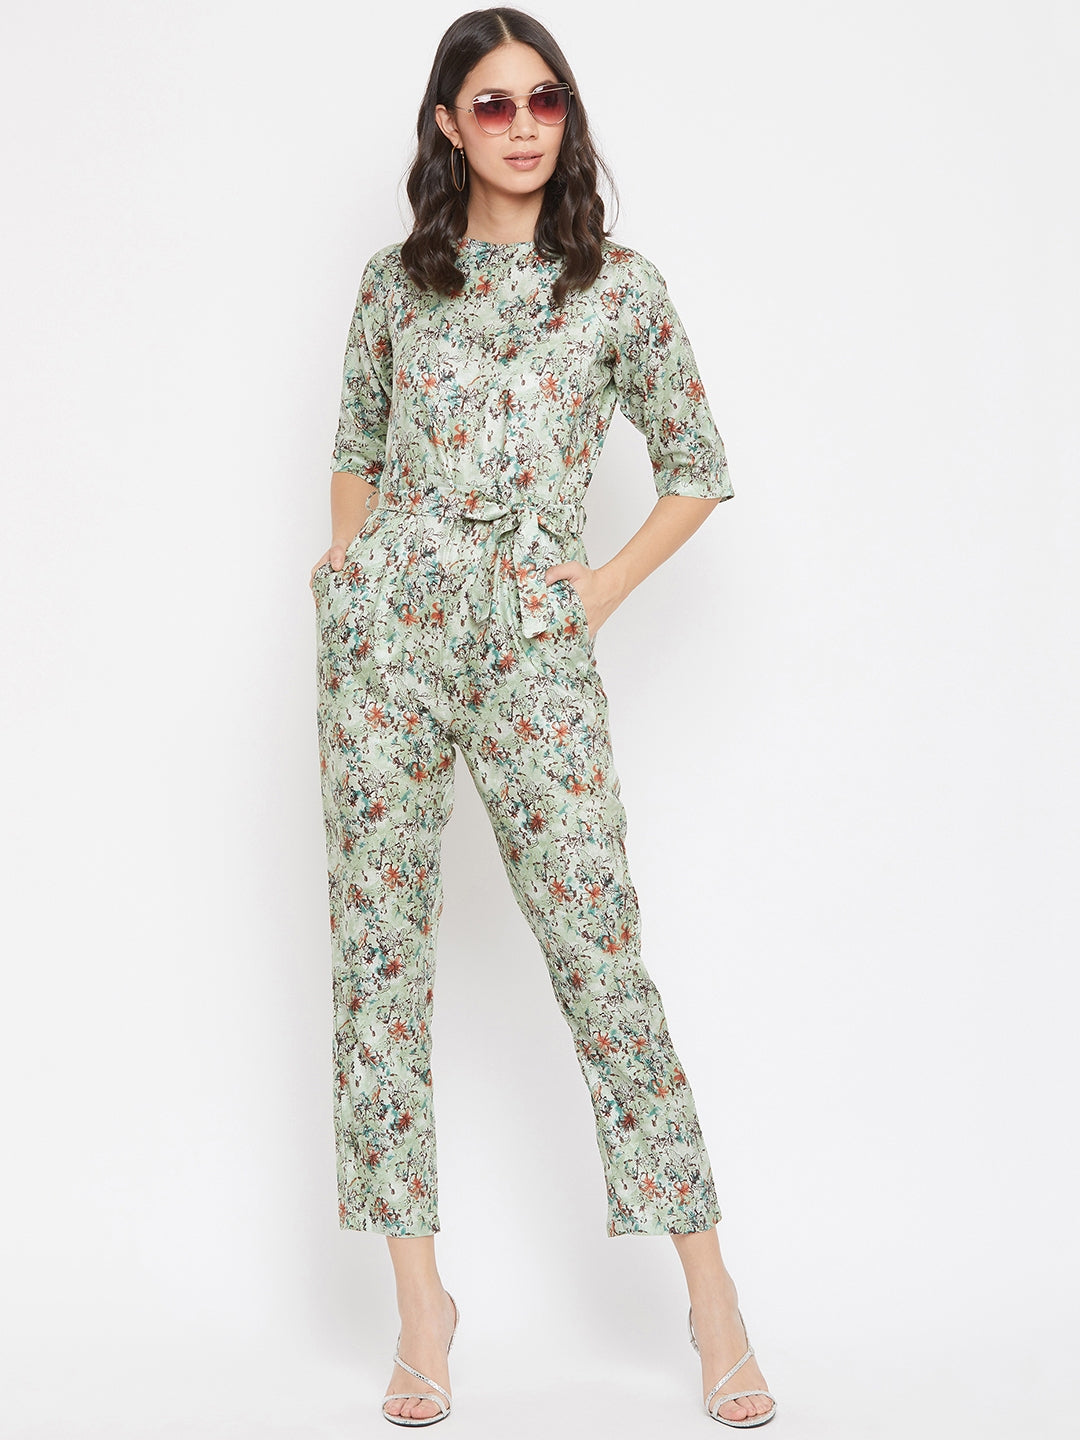 Green Printed Round Neck Jumpsuits - Women Jumpsuits